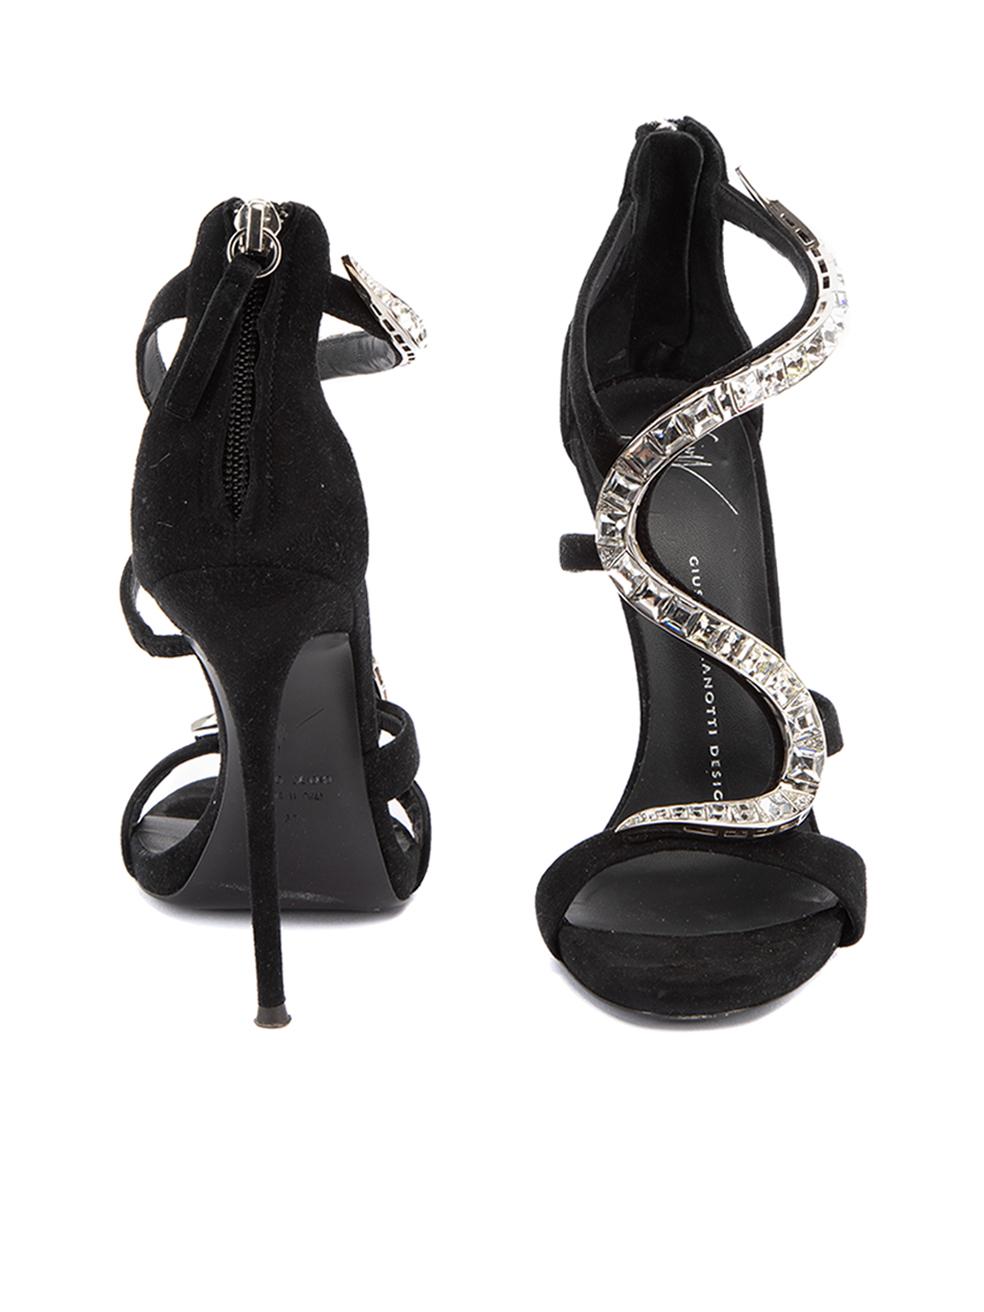 Giuseppe Zanotti Women's Black Crystal Embellished Heeled Sandals In Excellent Condition For Sale In London, GB